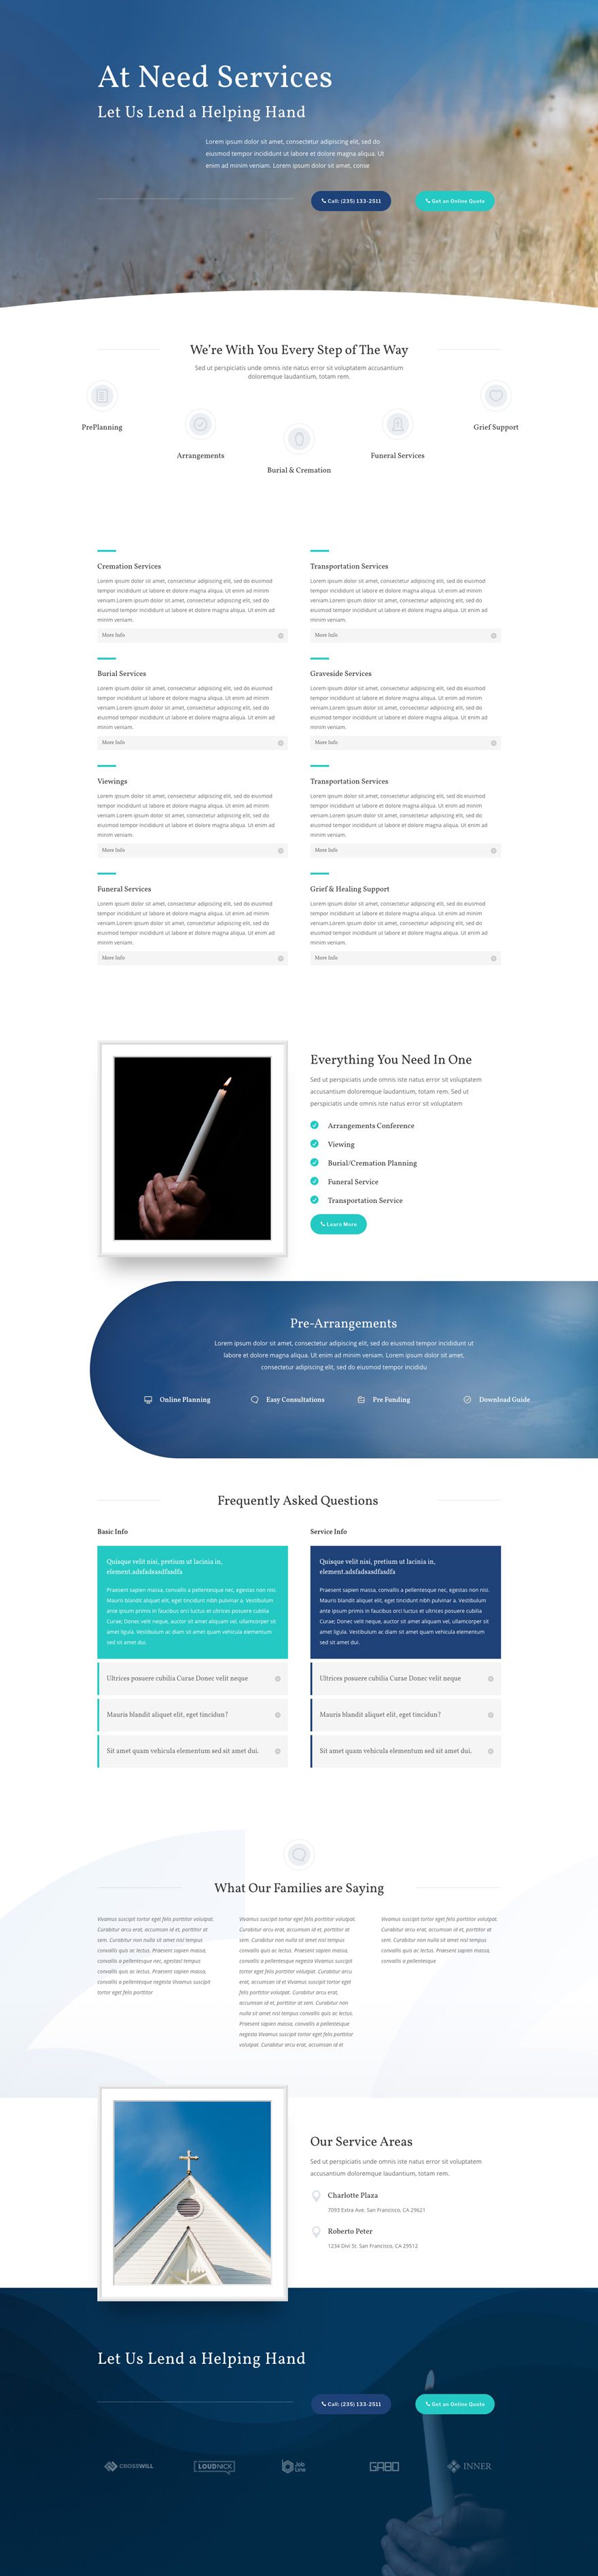 divi funeral home layout